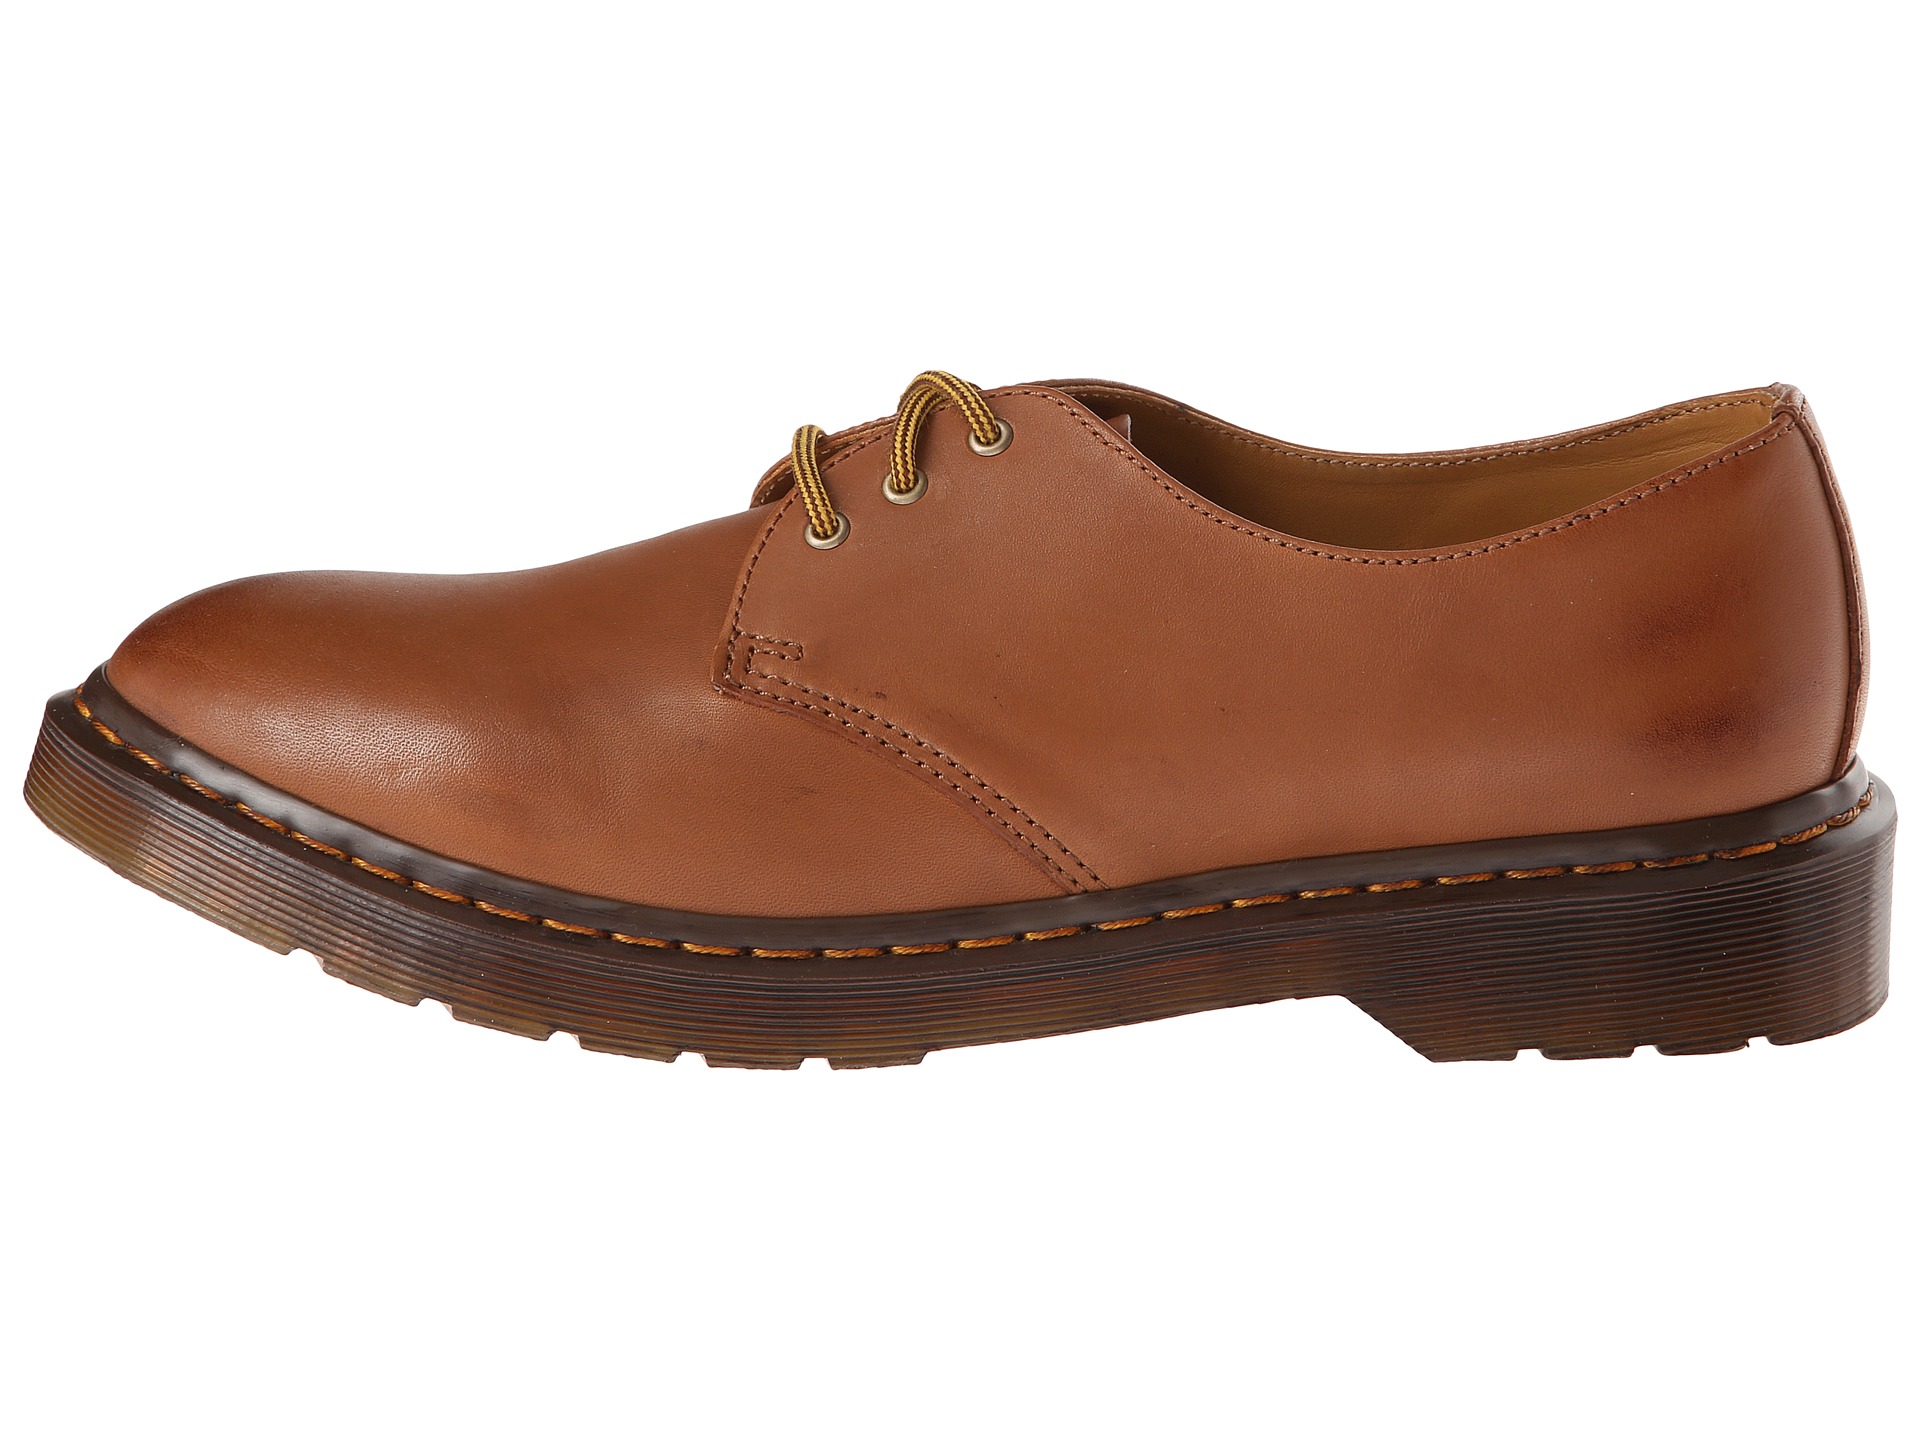 Dr Martens Dorian 3 Eye Shoe Brown Rugged Servo Lux | Shipped Free at ...